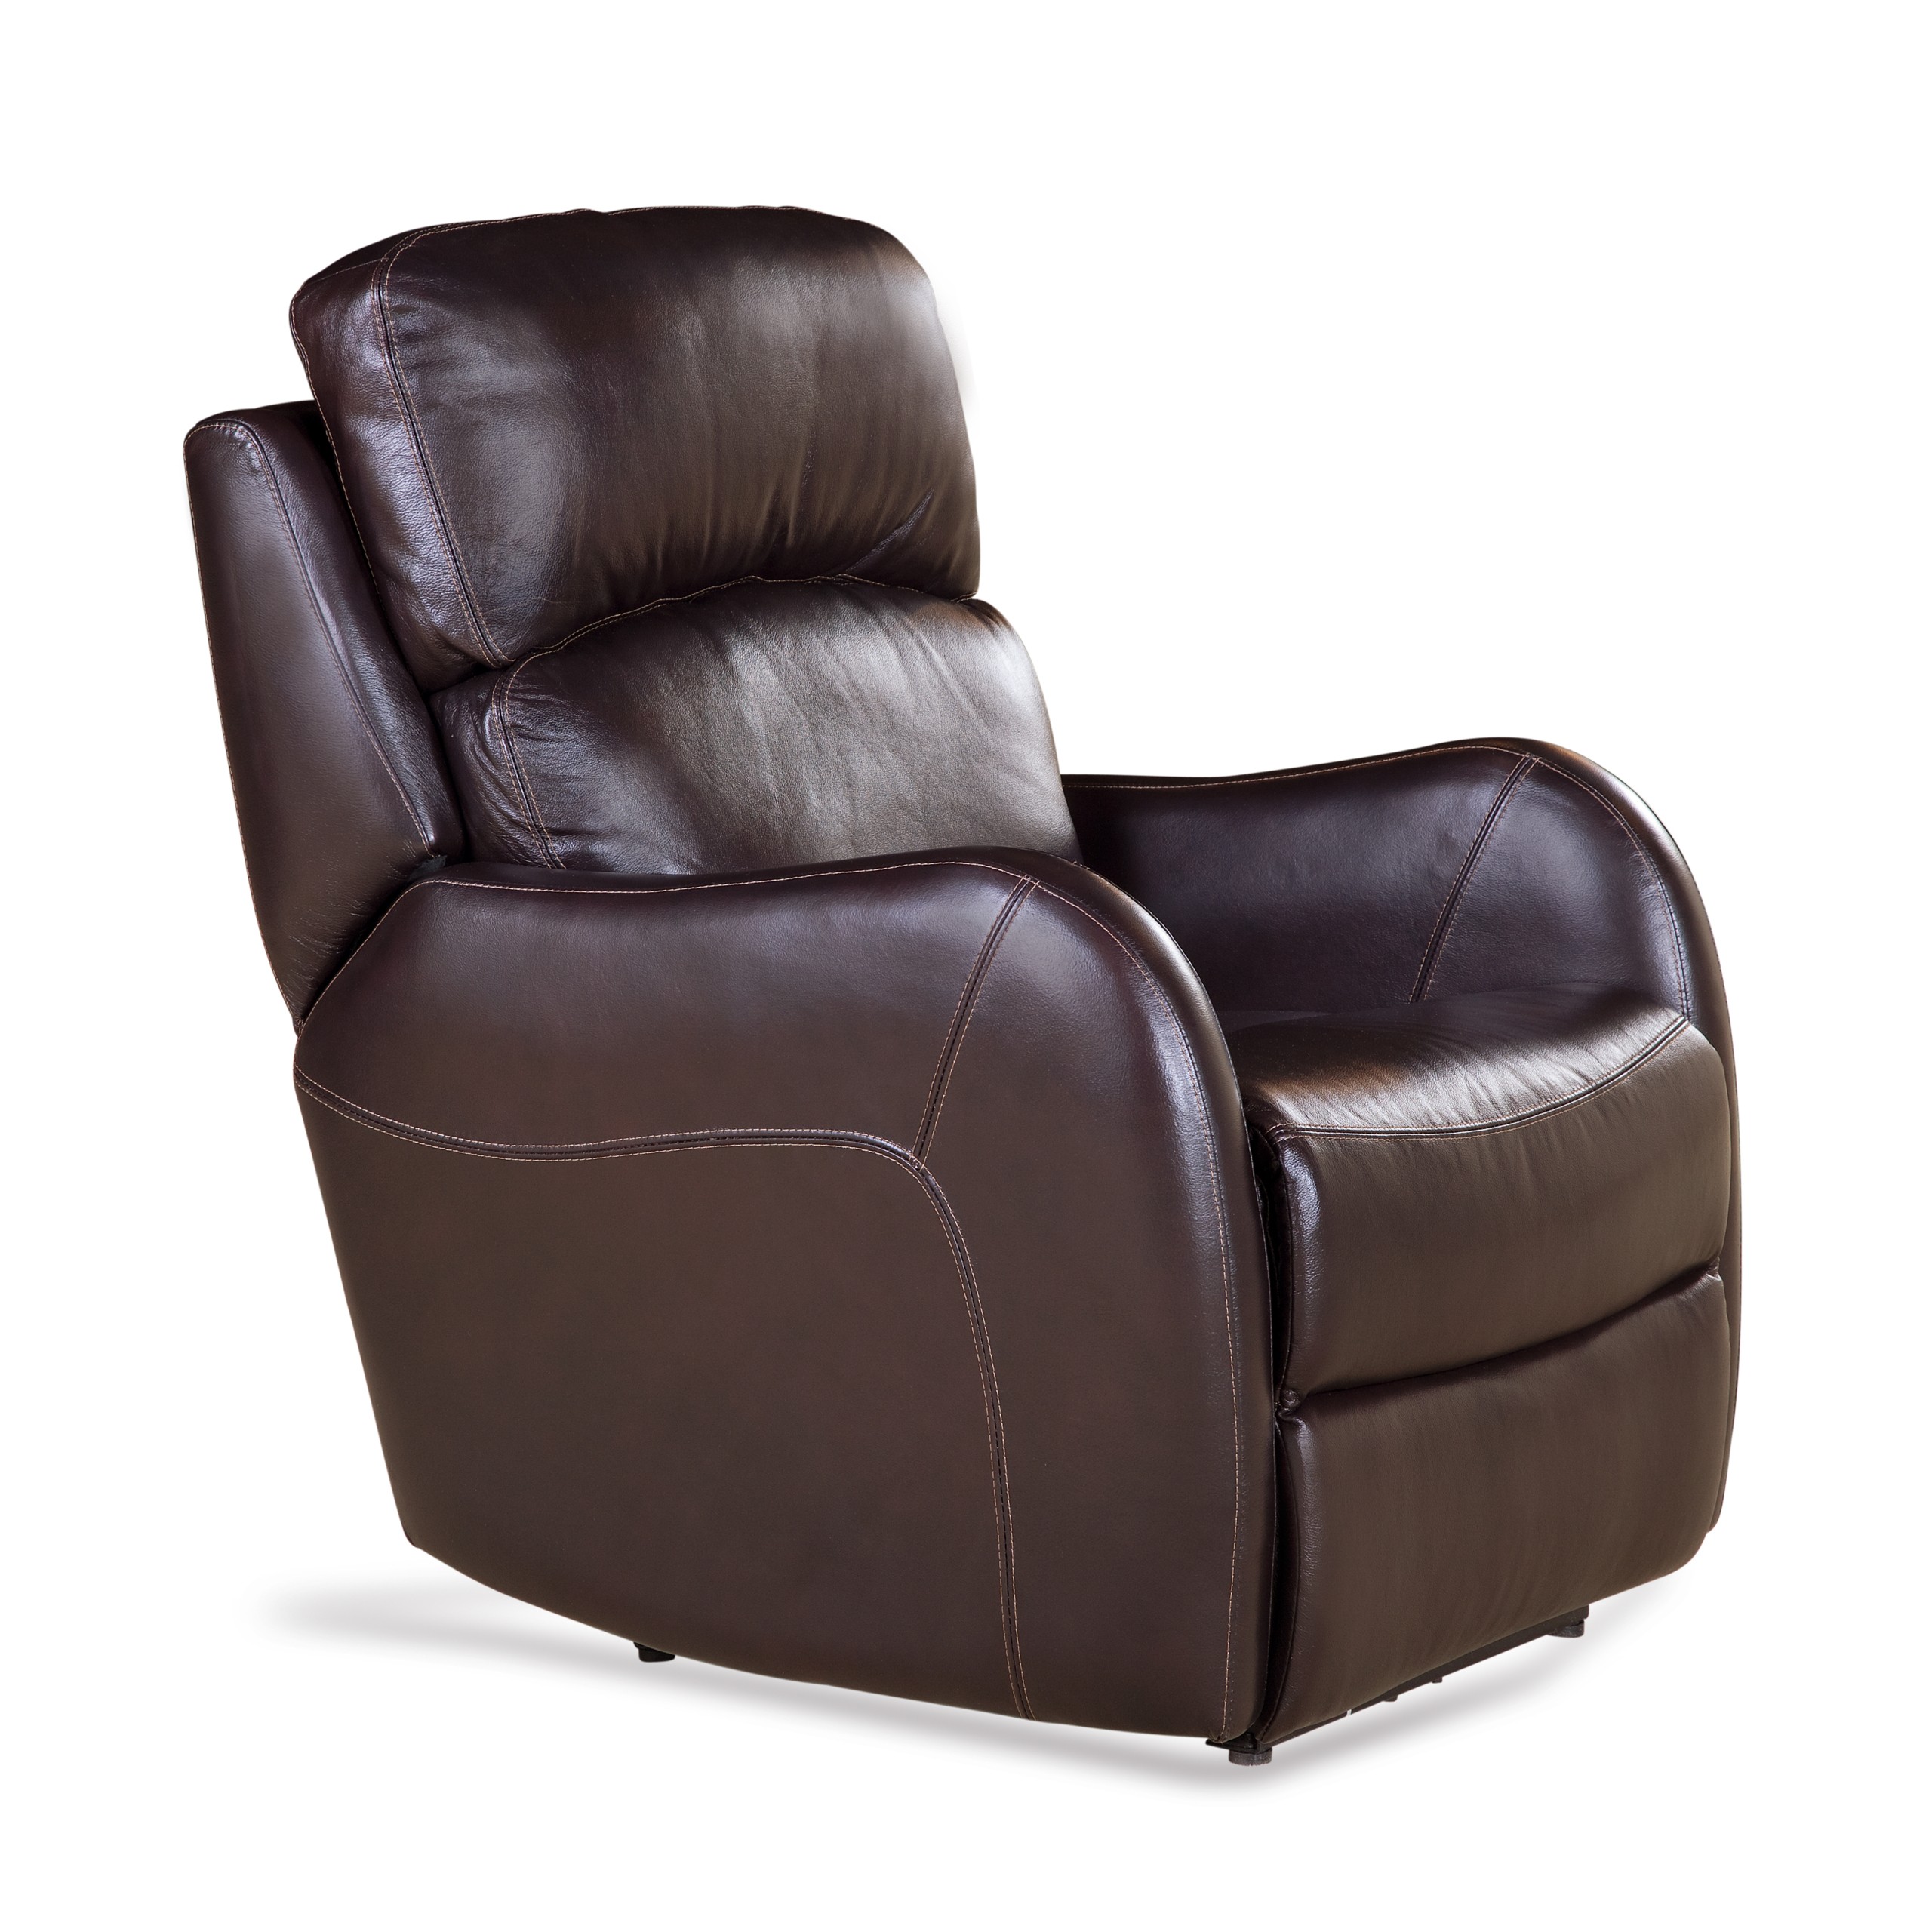 Barcalounger treadway ii leather recliner at hayneedle